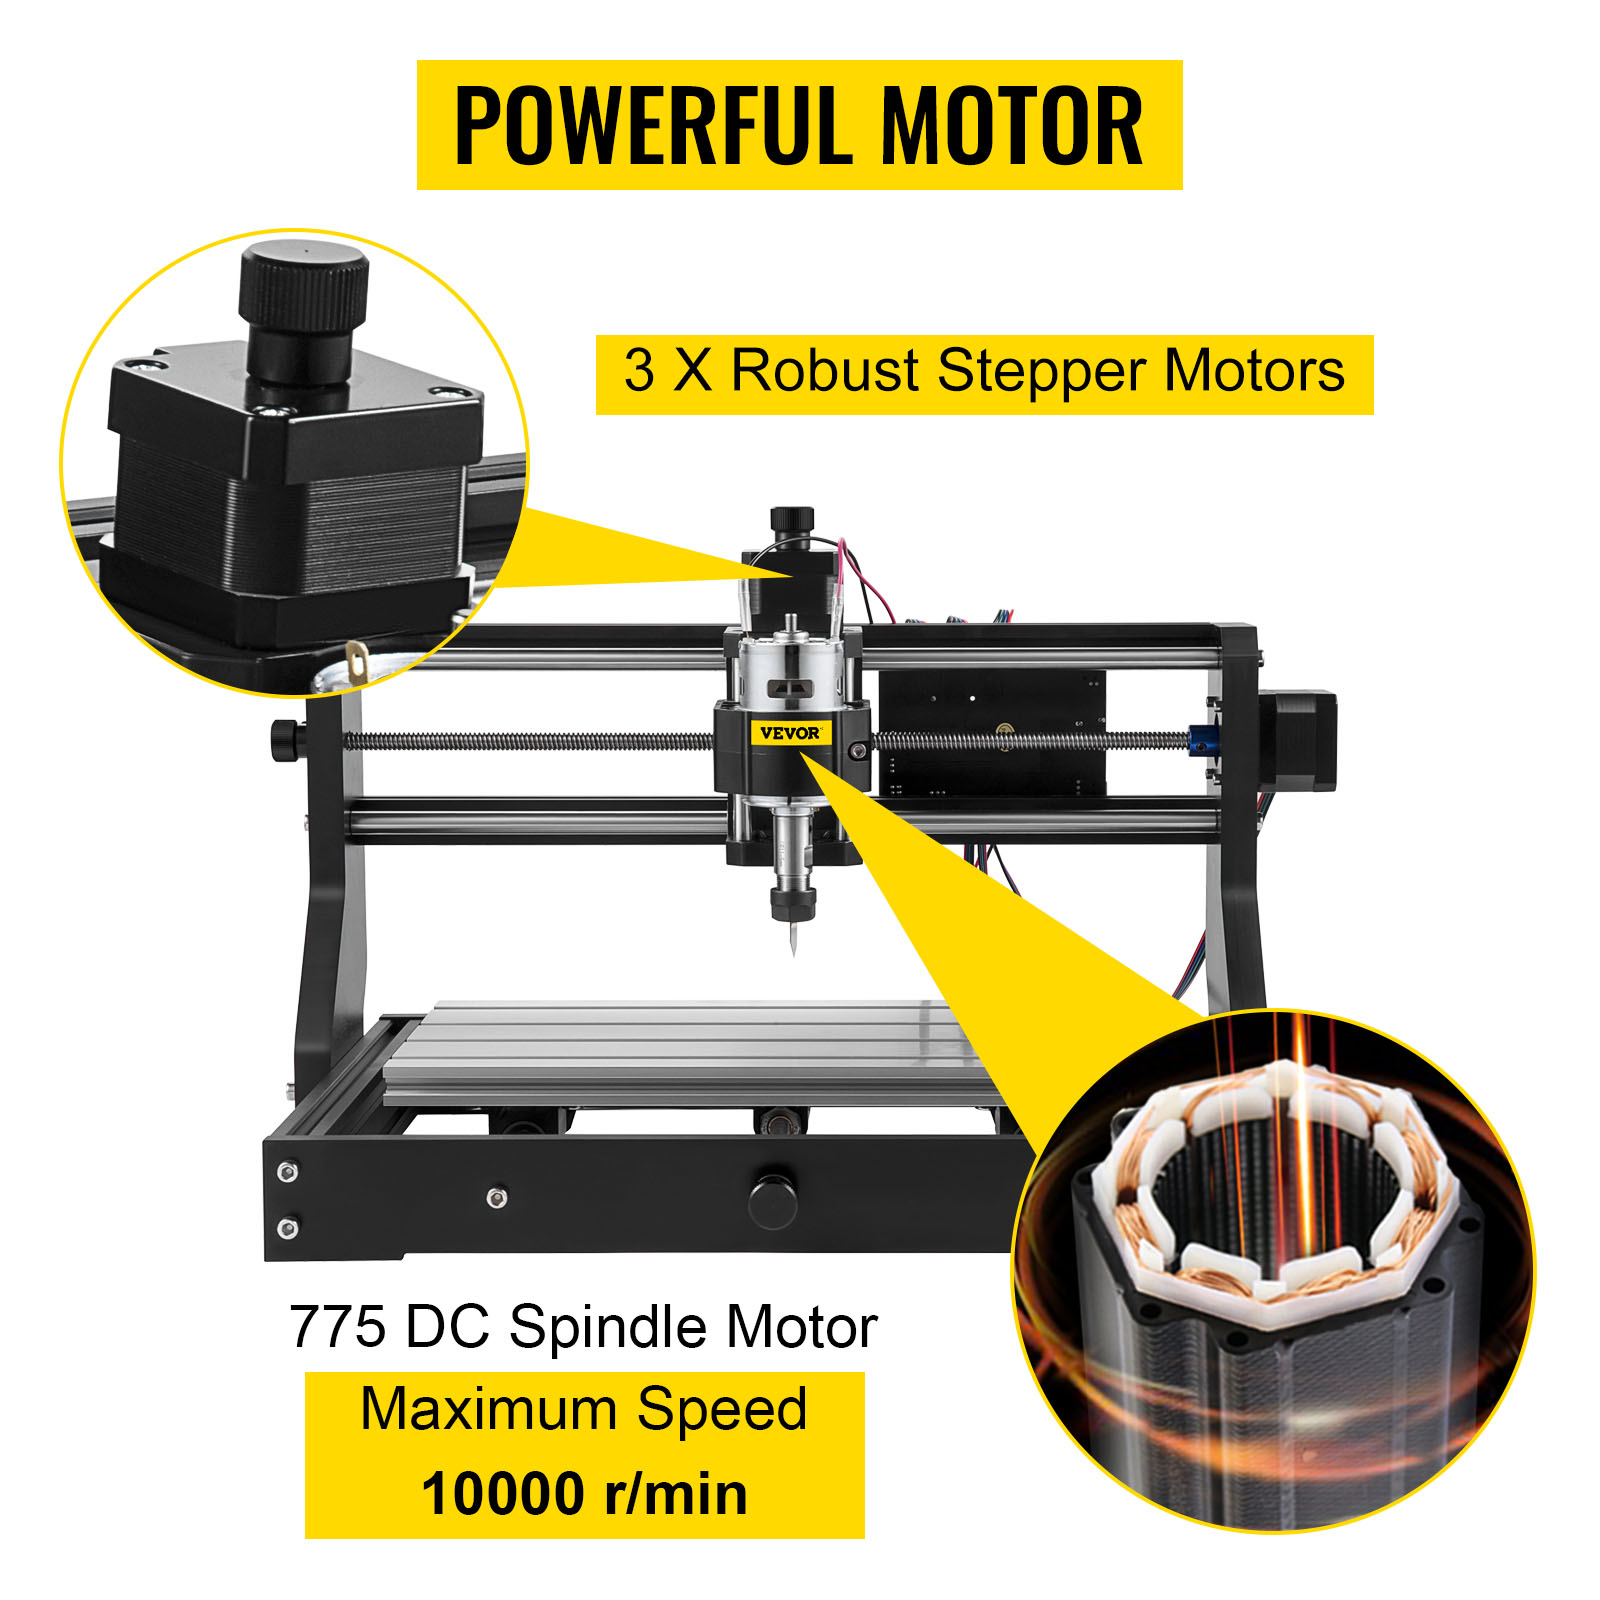 CNCTOPBAOS CNC 3018 Pro Wood Router Kit 3 Axis USB DIY Mini Engraver  Milling Engraving Machine Cutter Plastic Acrylic PCB PVC Carving GRBL  Control